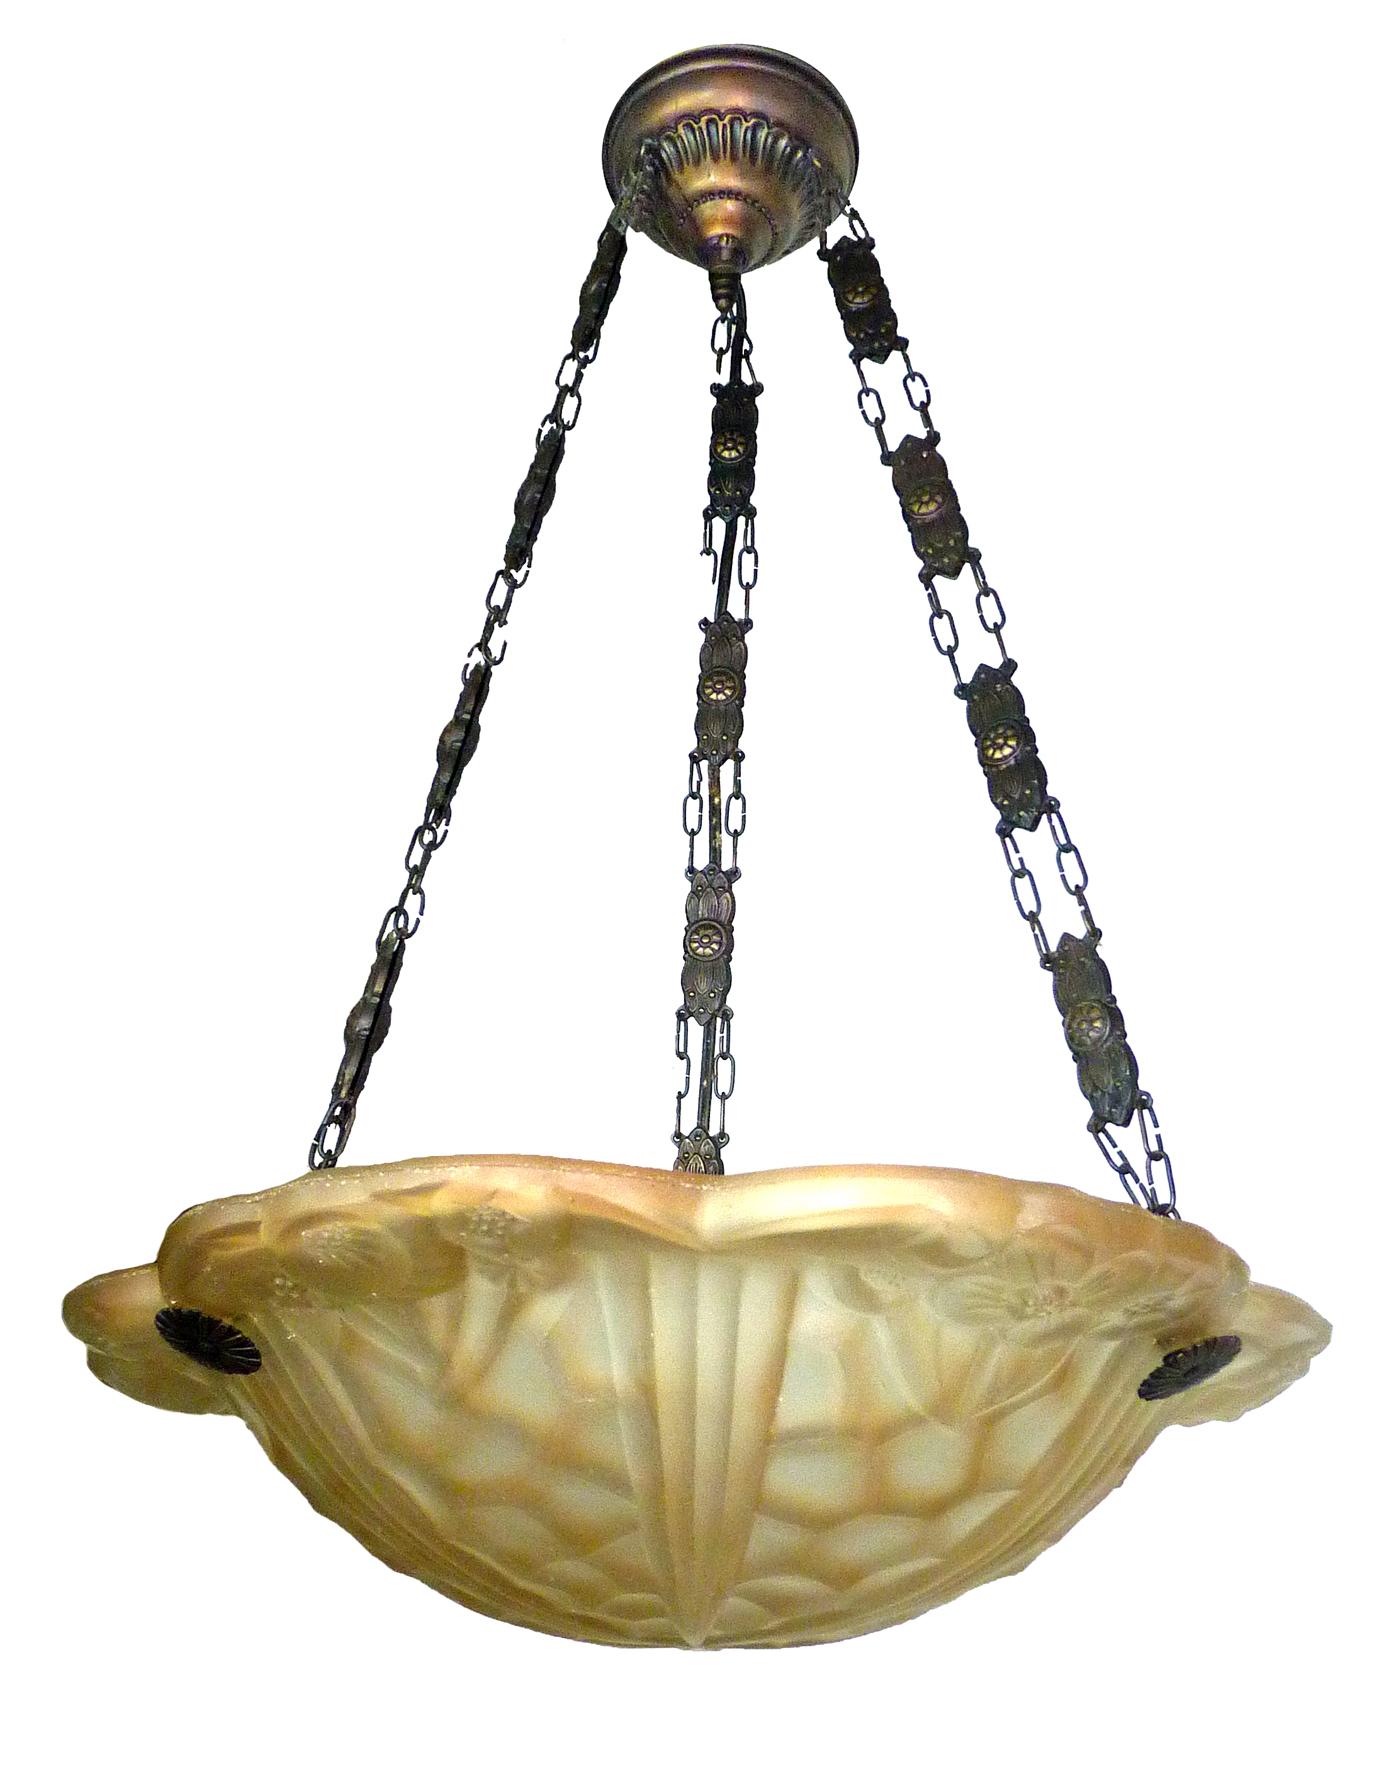 Beautiful French Art Deco chandelier or pendant with amber glass shade with floral and geometric pattern in the style of Degué.
Measures:
Width 16 in / 40 cm
Height 26 in / 65 cm
Weight 12 lb. (5 kg)
One light bulb E 27 / good working